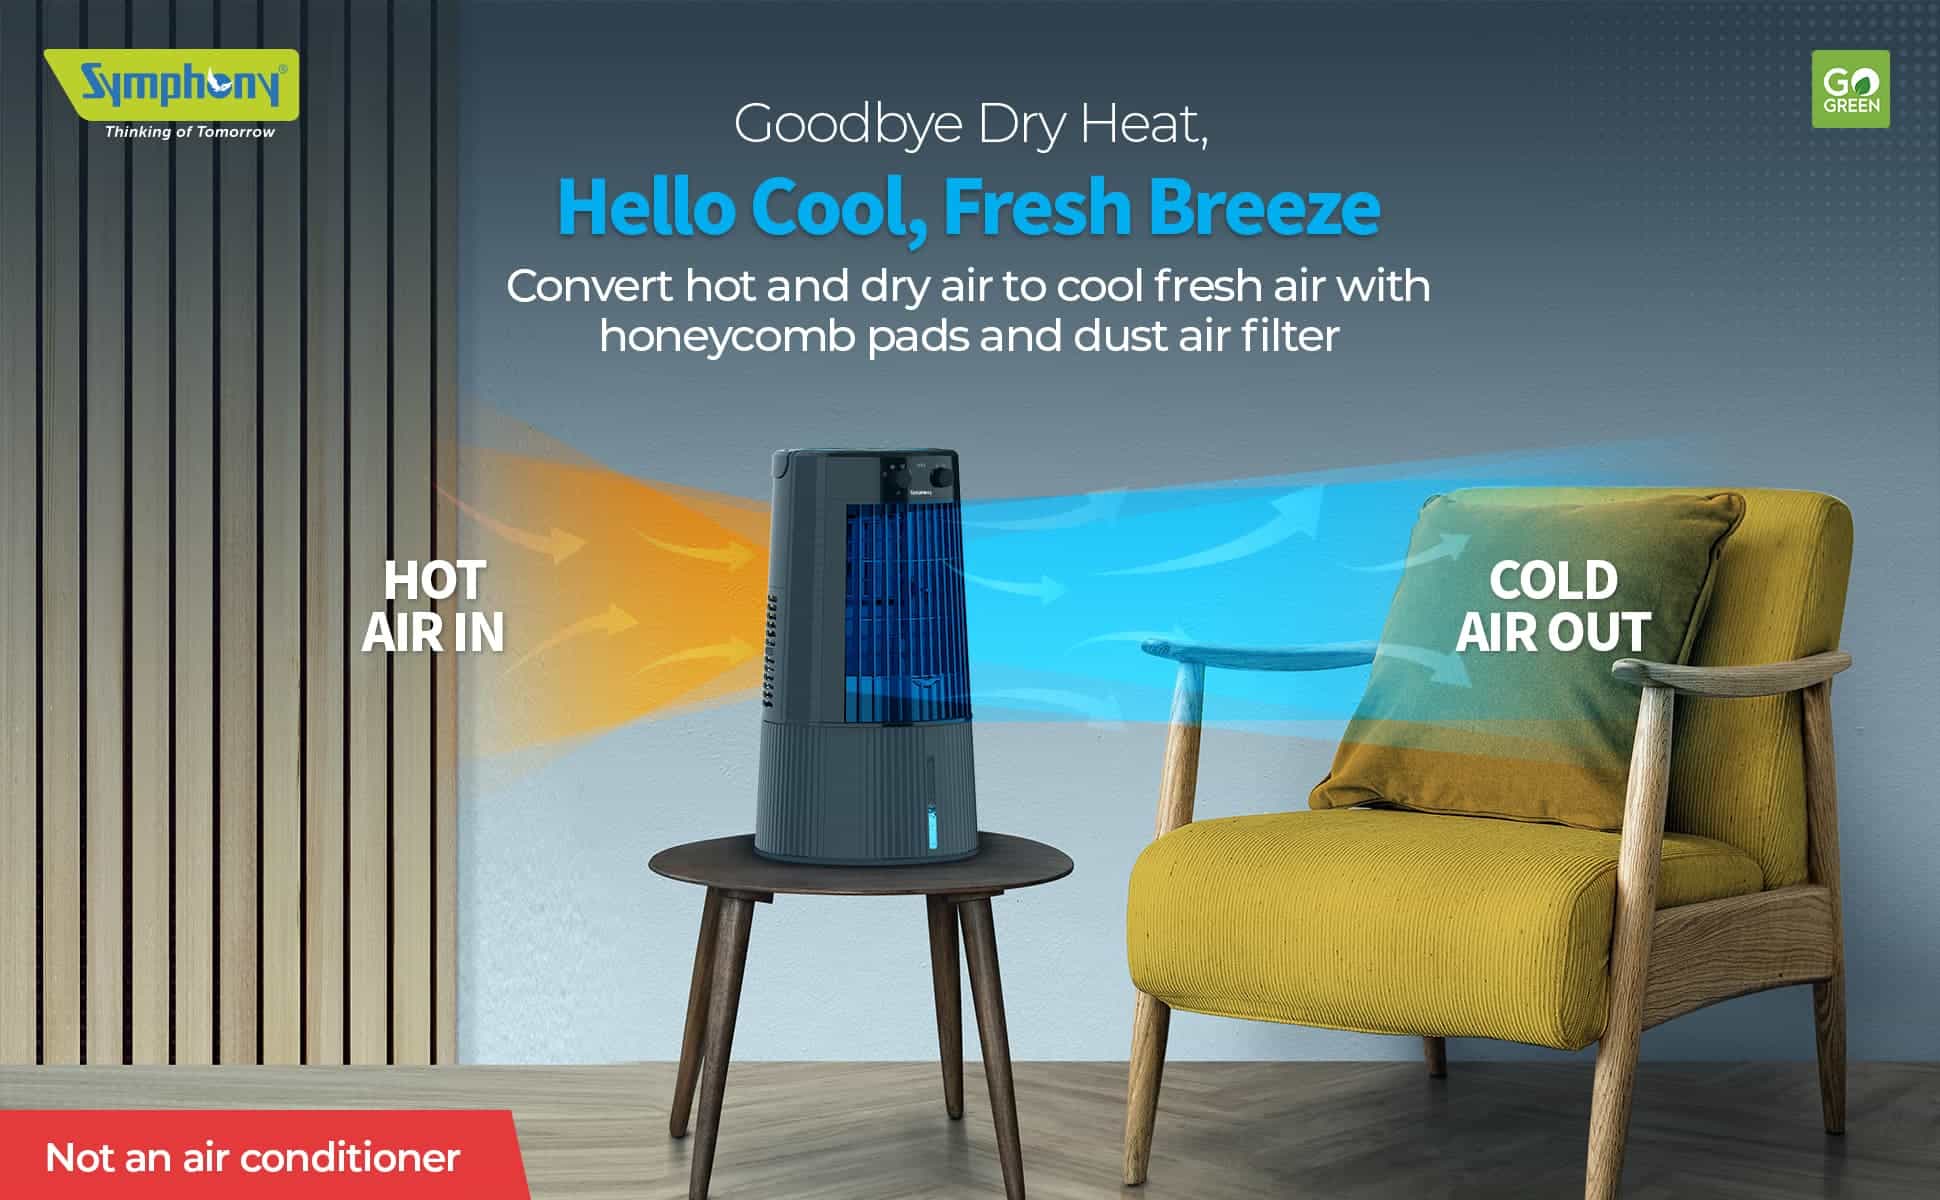 Symphony Duet – Goodbye Dry Heat, Hello Cool, Fresh Breeze Convert hot and dry air to cool fresh air with honeycomb pads and dust air filter - HOT AIR IN - COLD AIR OUT - Not an air conditioner